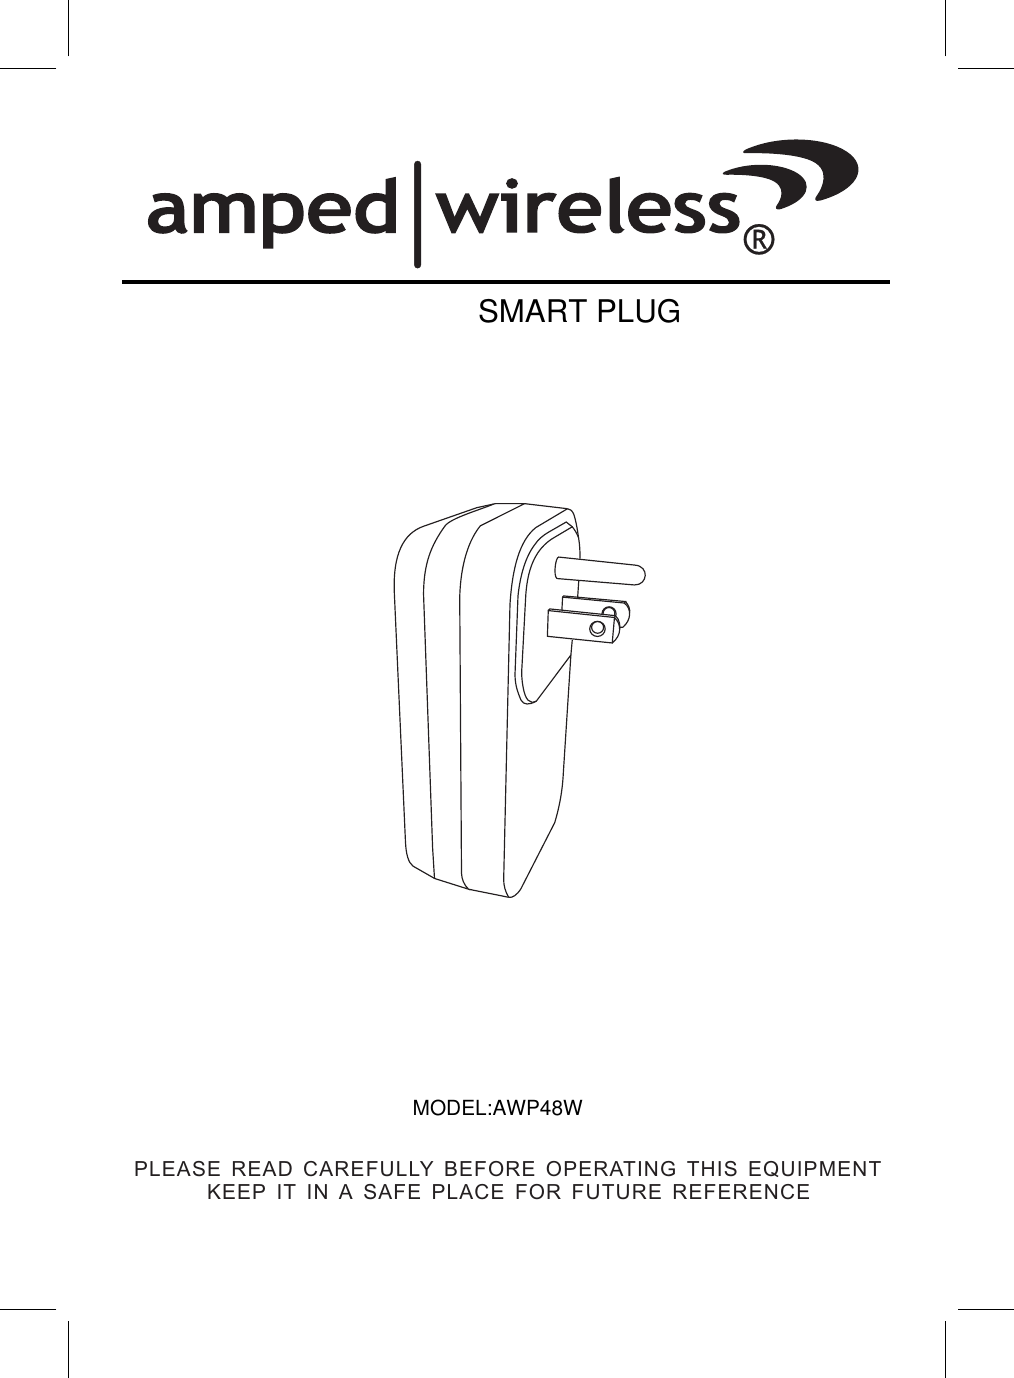 PLEASE READ CAREFULLY BEFORE OPERATING THIS EQUIPMENTKEEP IT IN A SAFE PLACE FOR FUTURE REFERENCEBASIC WIFI SMART PLUGMODEL:AWP48W